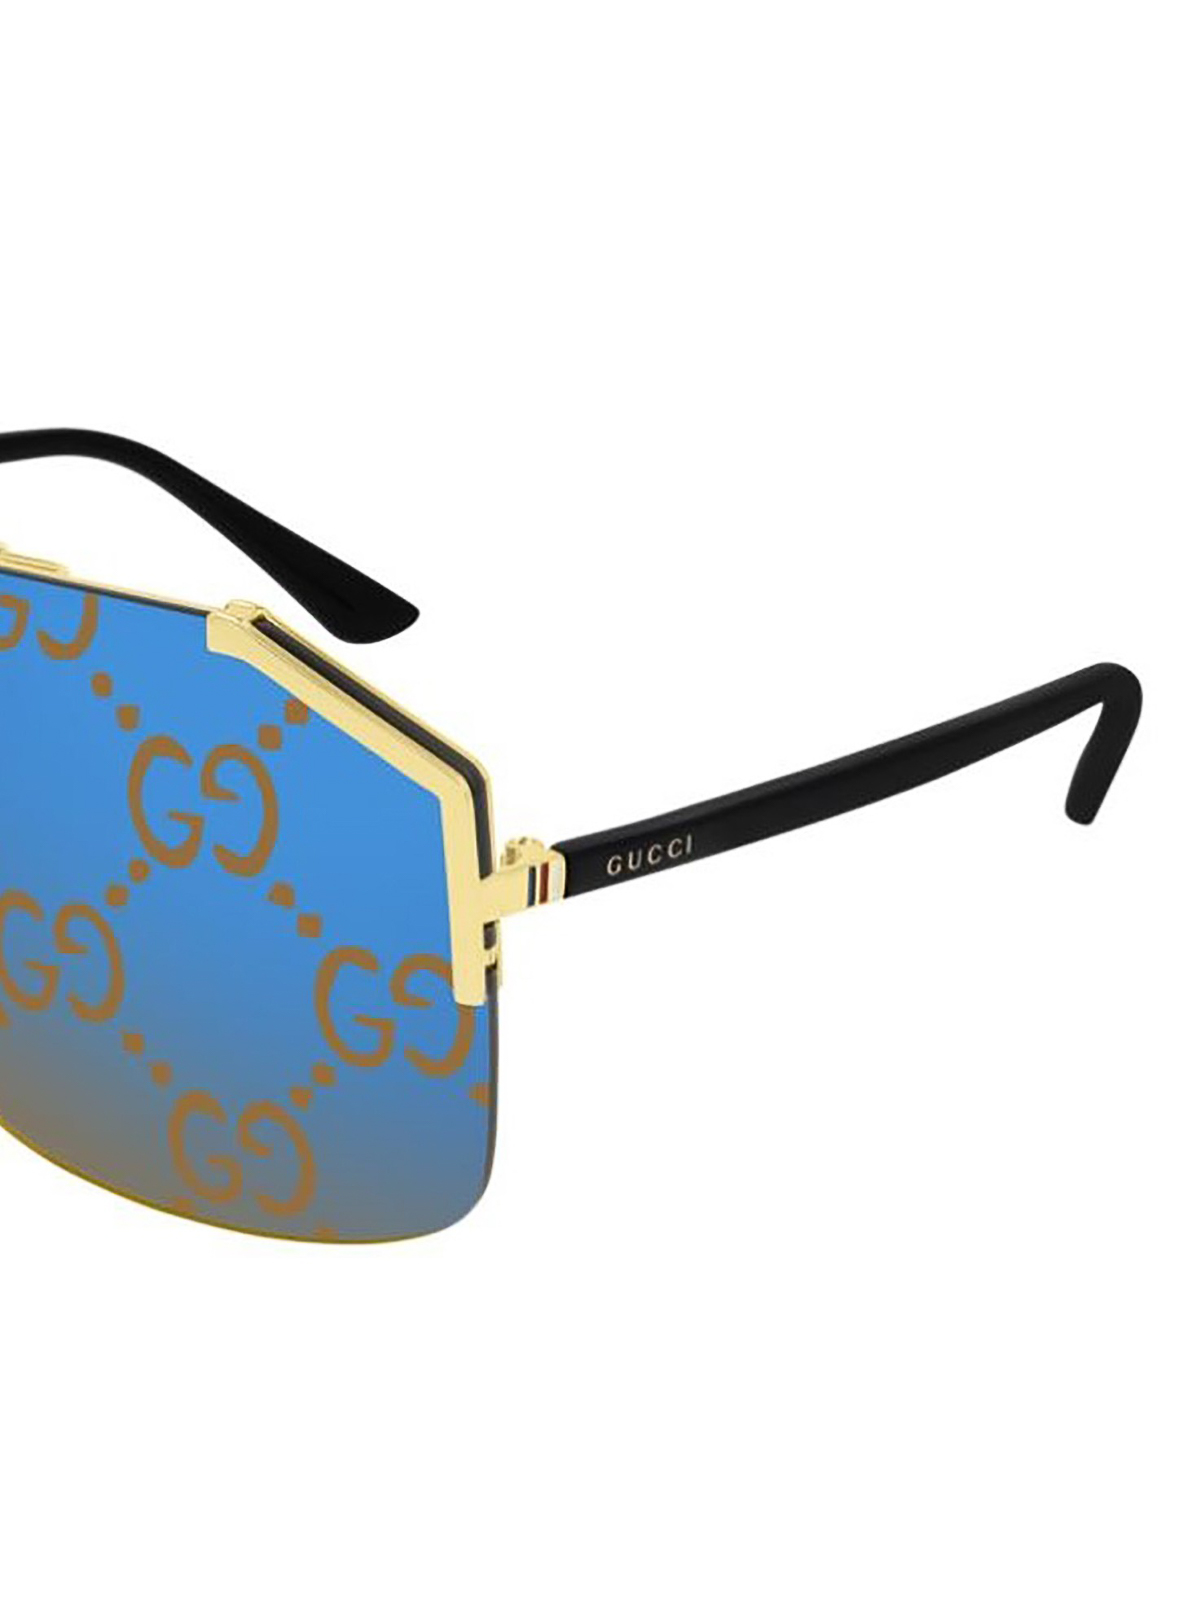 gucci sunglasses with gucci logo on lens